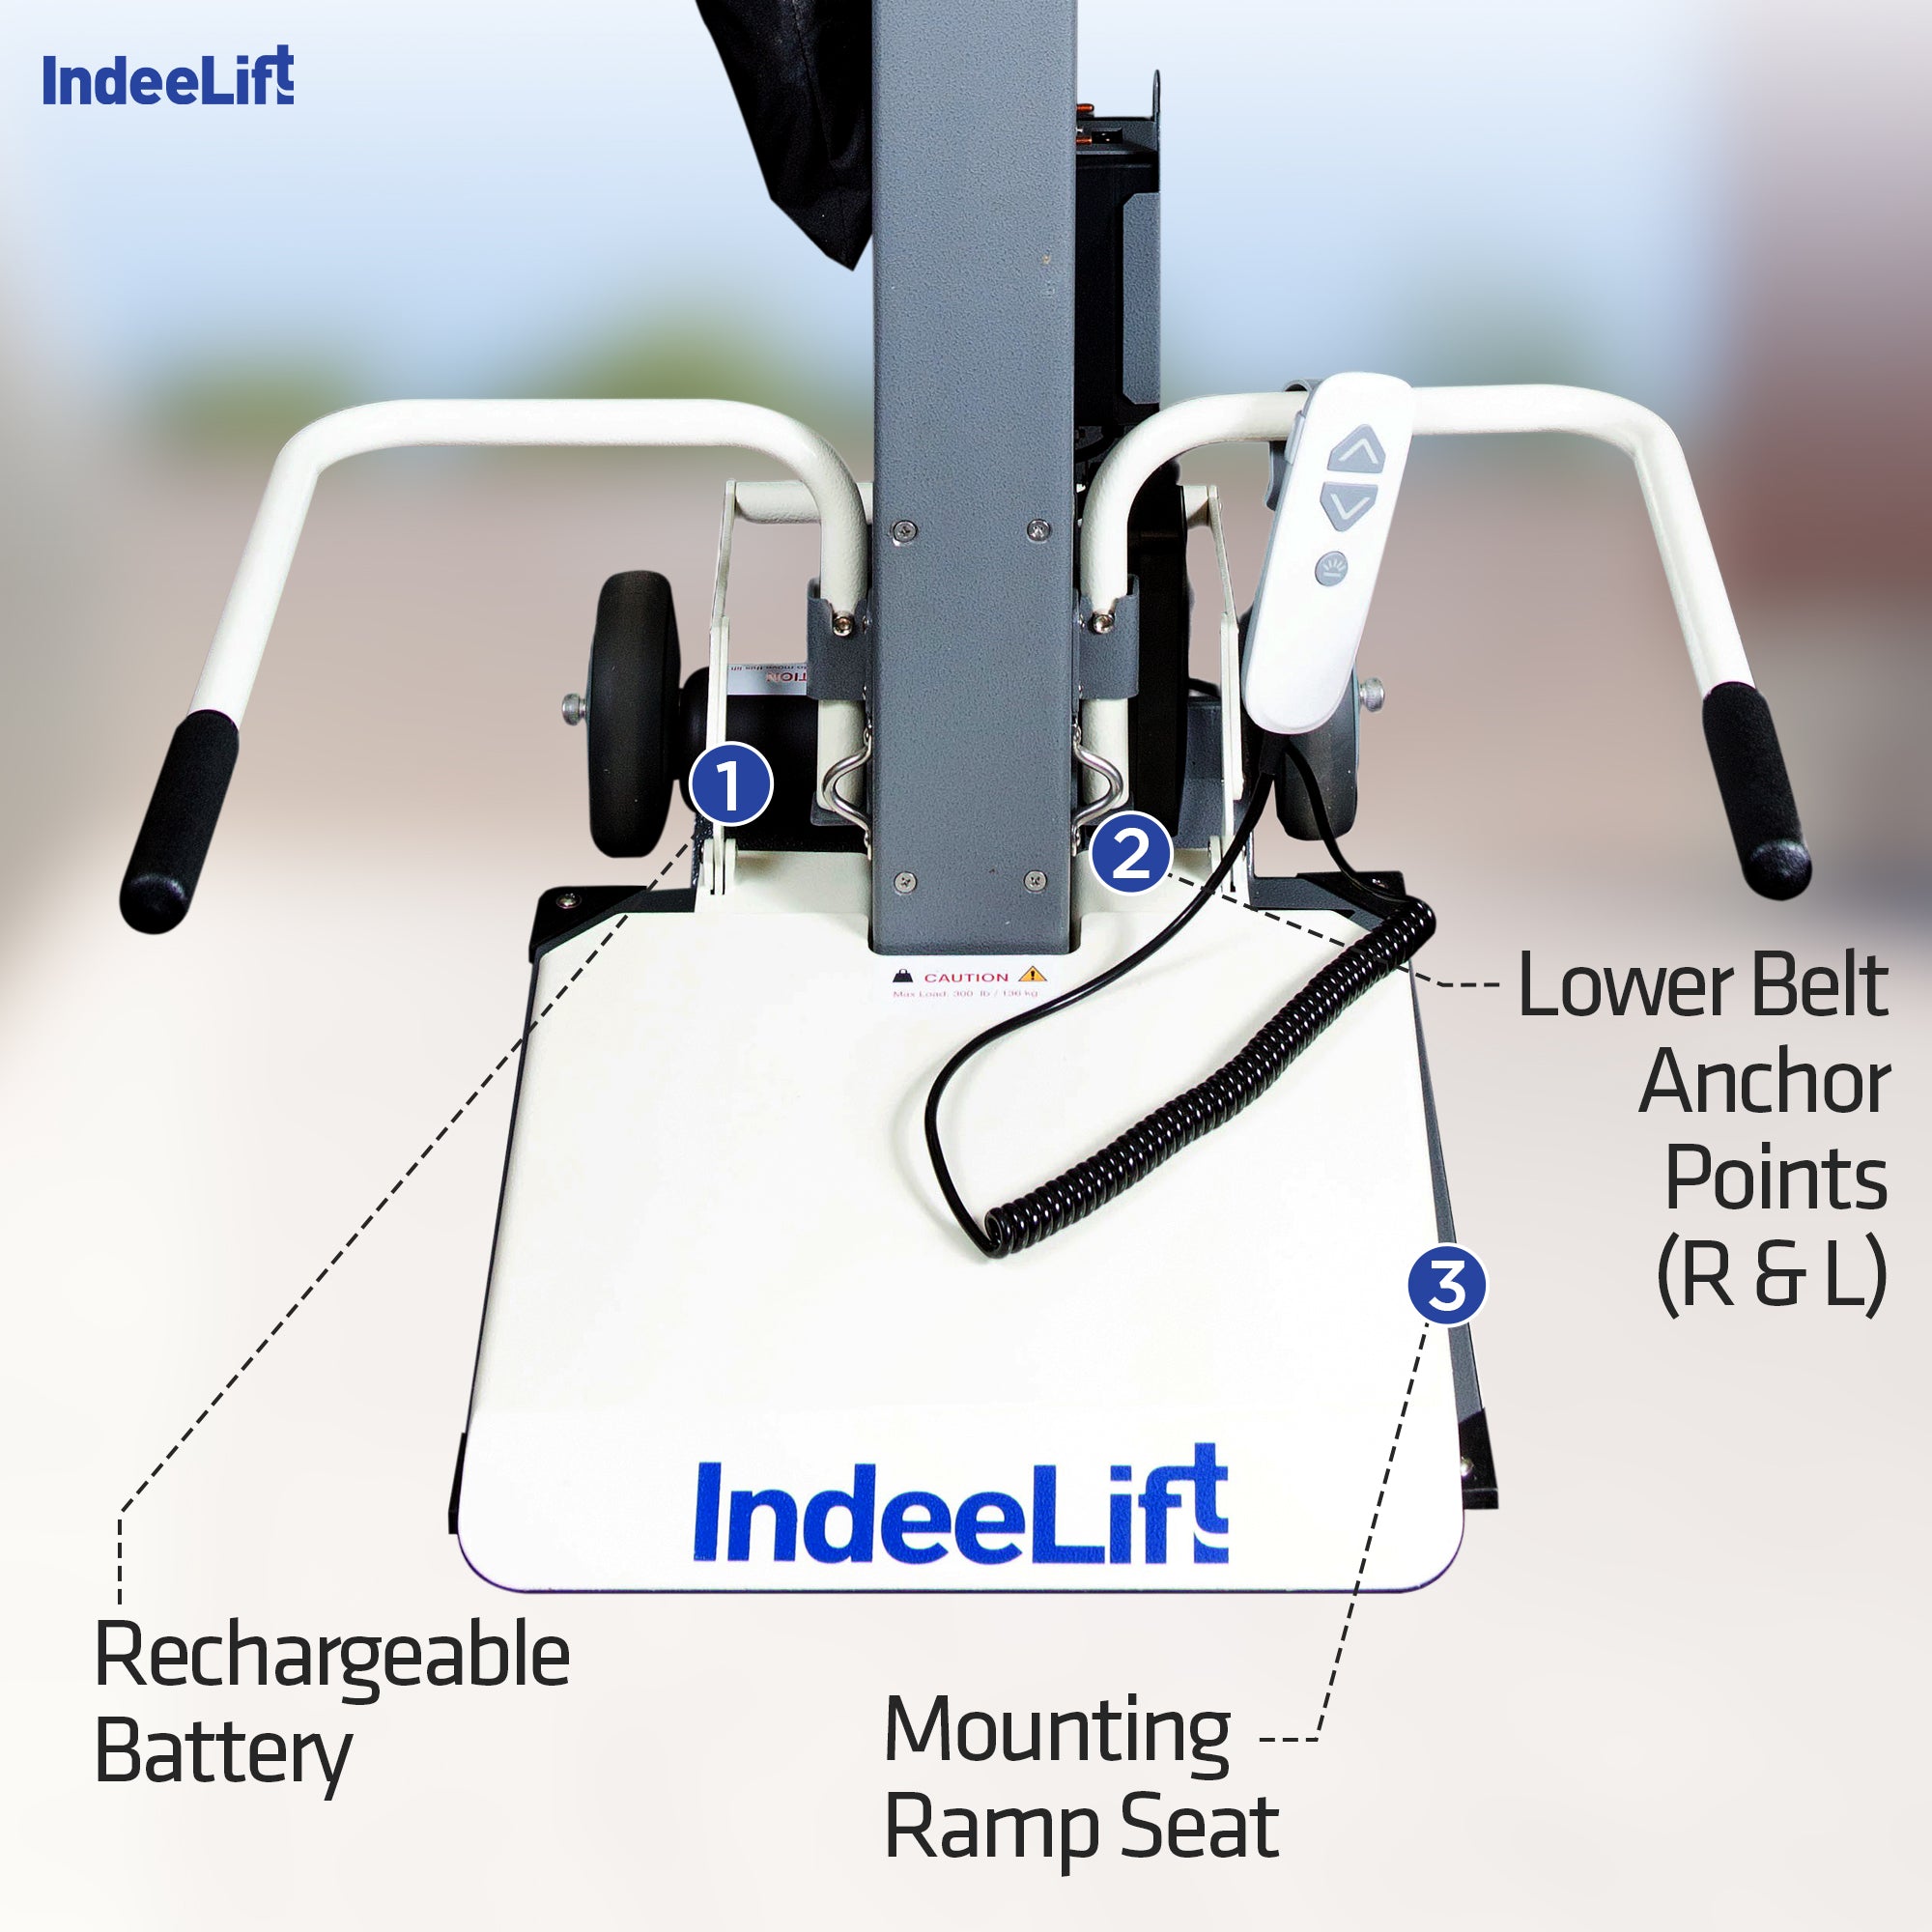 IndeeLift People Picker Upper | PPU-S 400 | Lift Assist, Fall Recovery, Transfer Aid